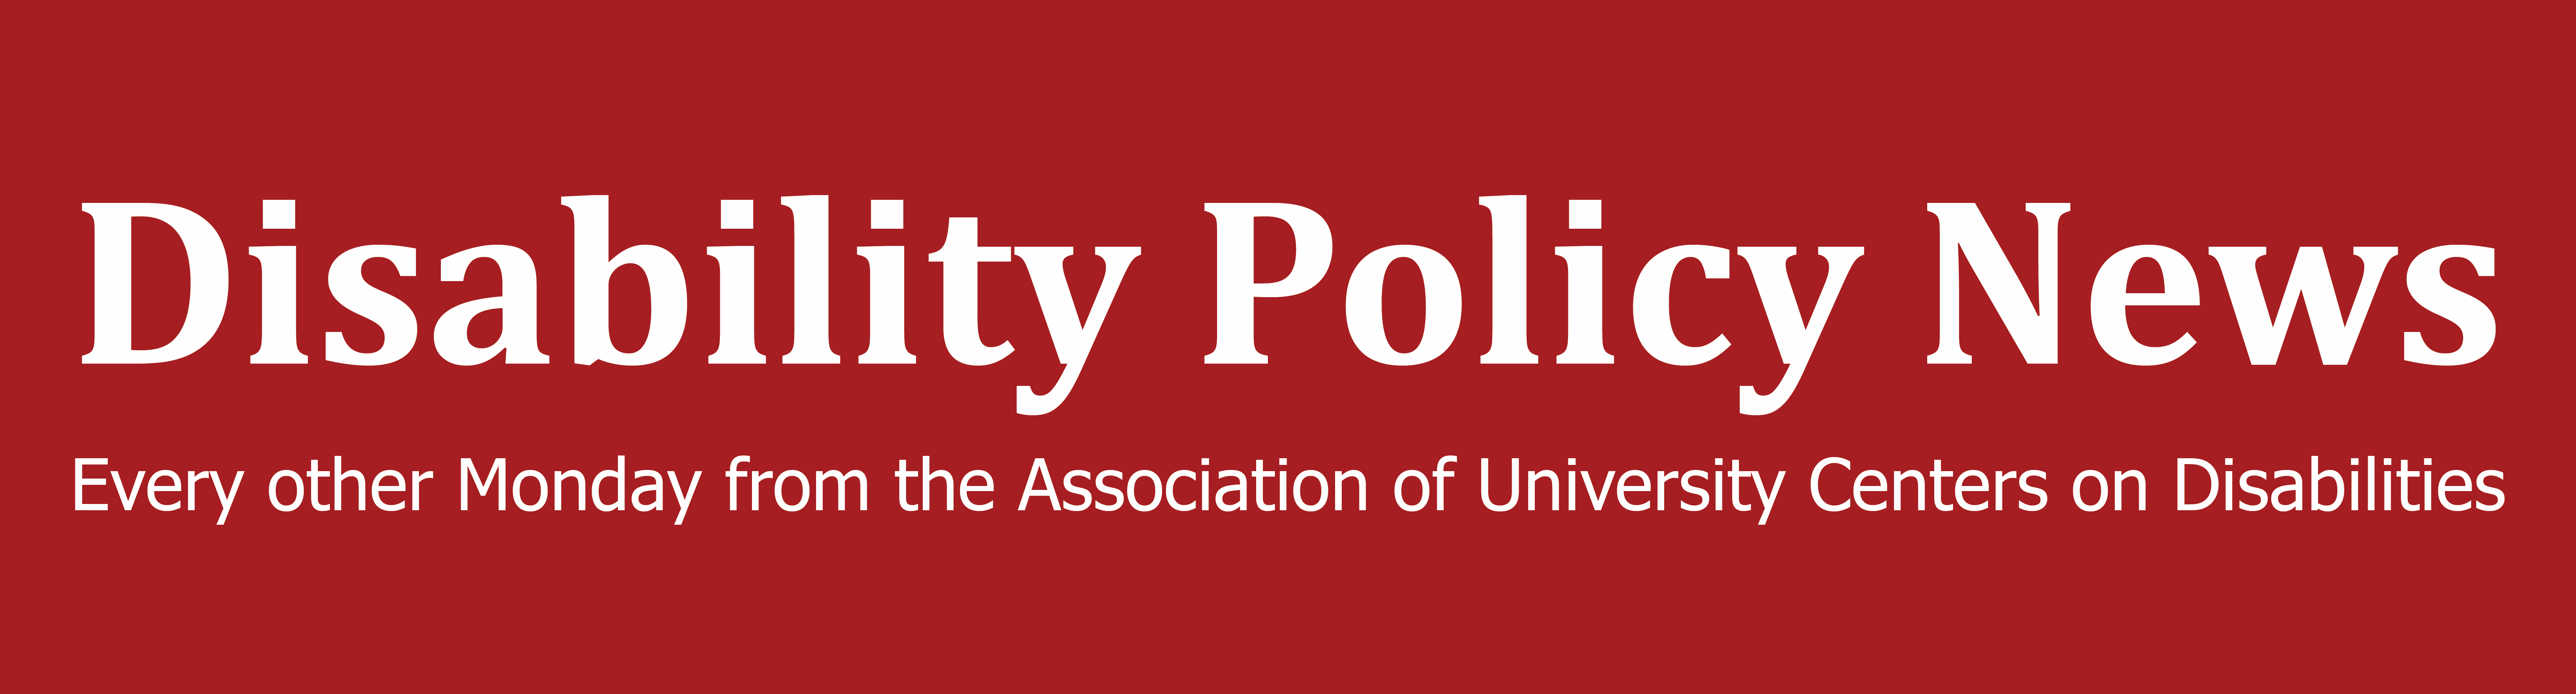 Disability Policy News banner with red background and white writing. Every Monday from the Association of University Centers on Disabilities